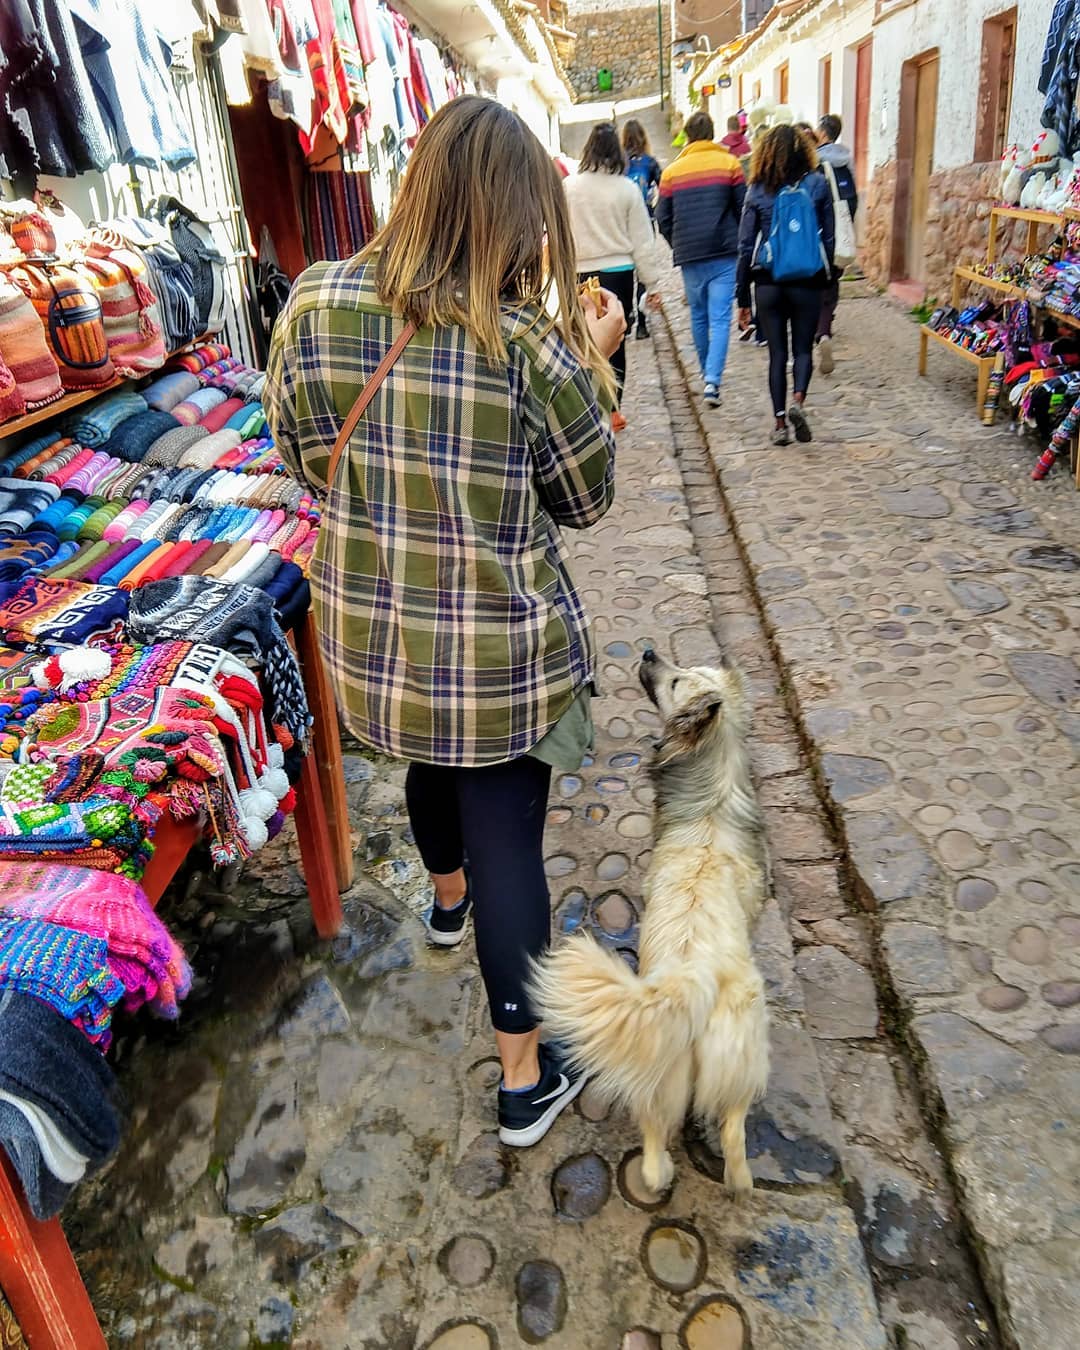 Woman looking down at a dog that is looking up at her, walking down a narrow cobblestone street where colorful clothes are for sale.